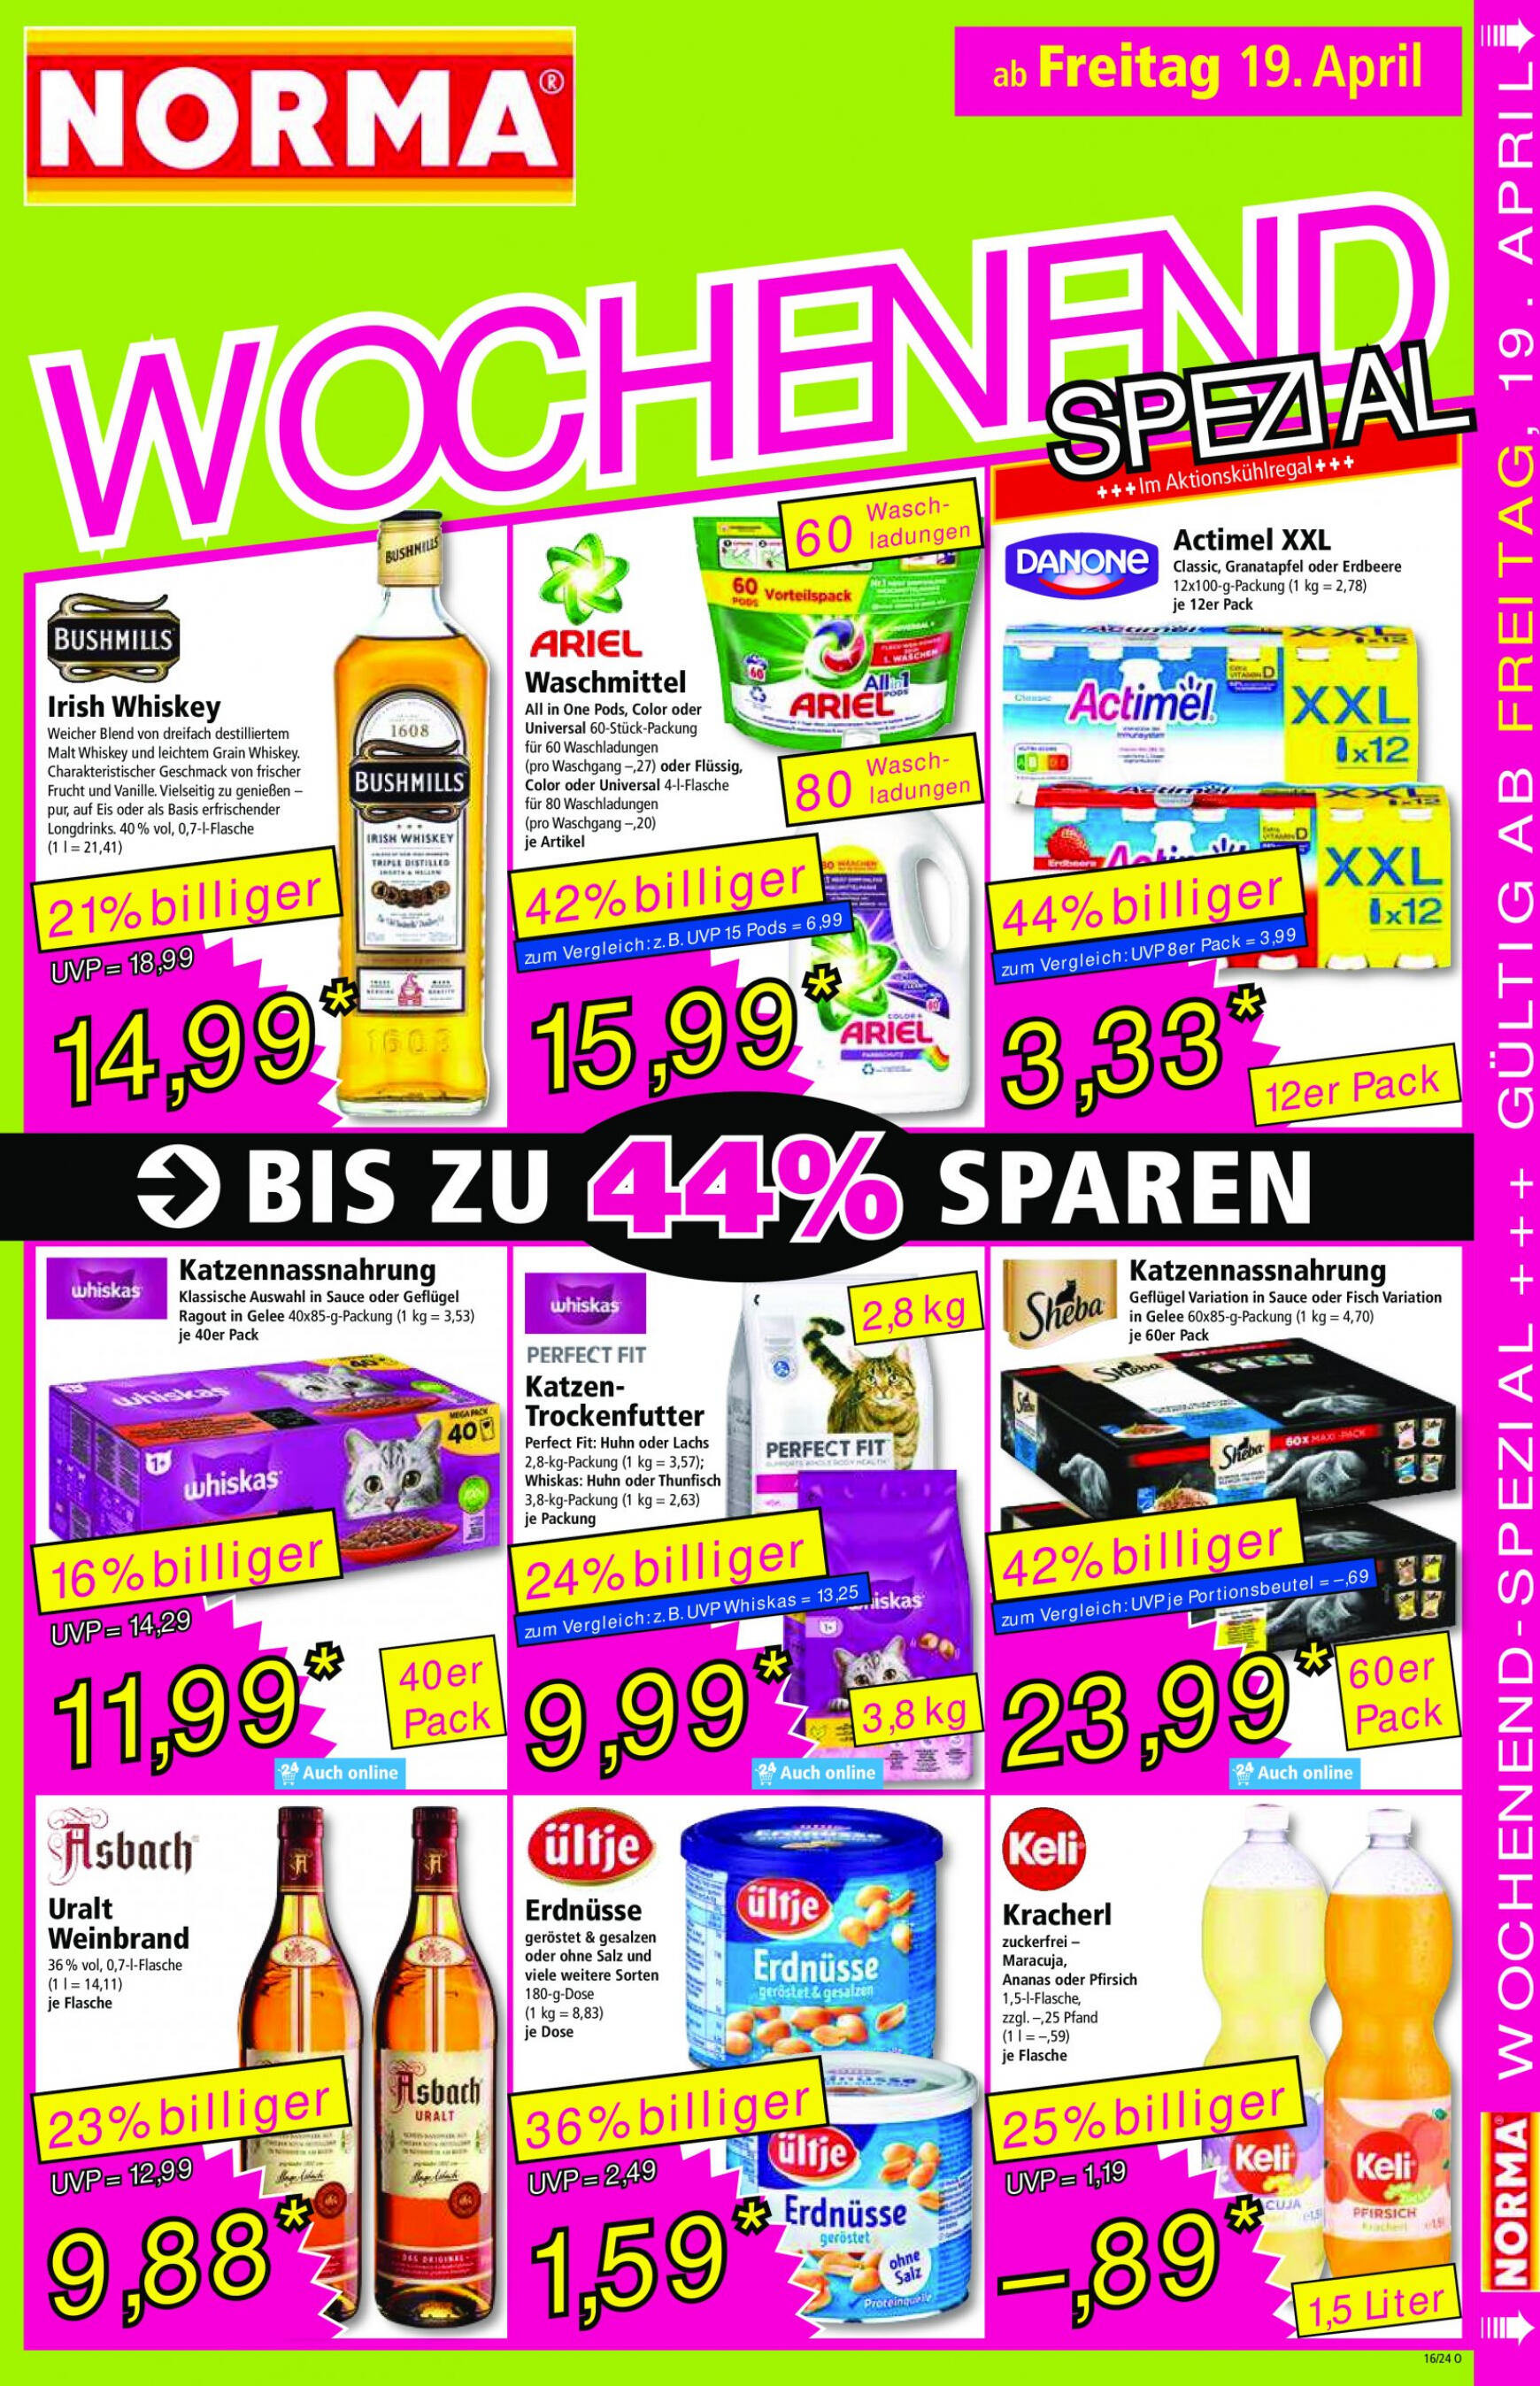 norma - Flyer Norma aktuell 15.04. - 20.04. - page: 15